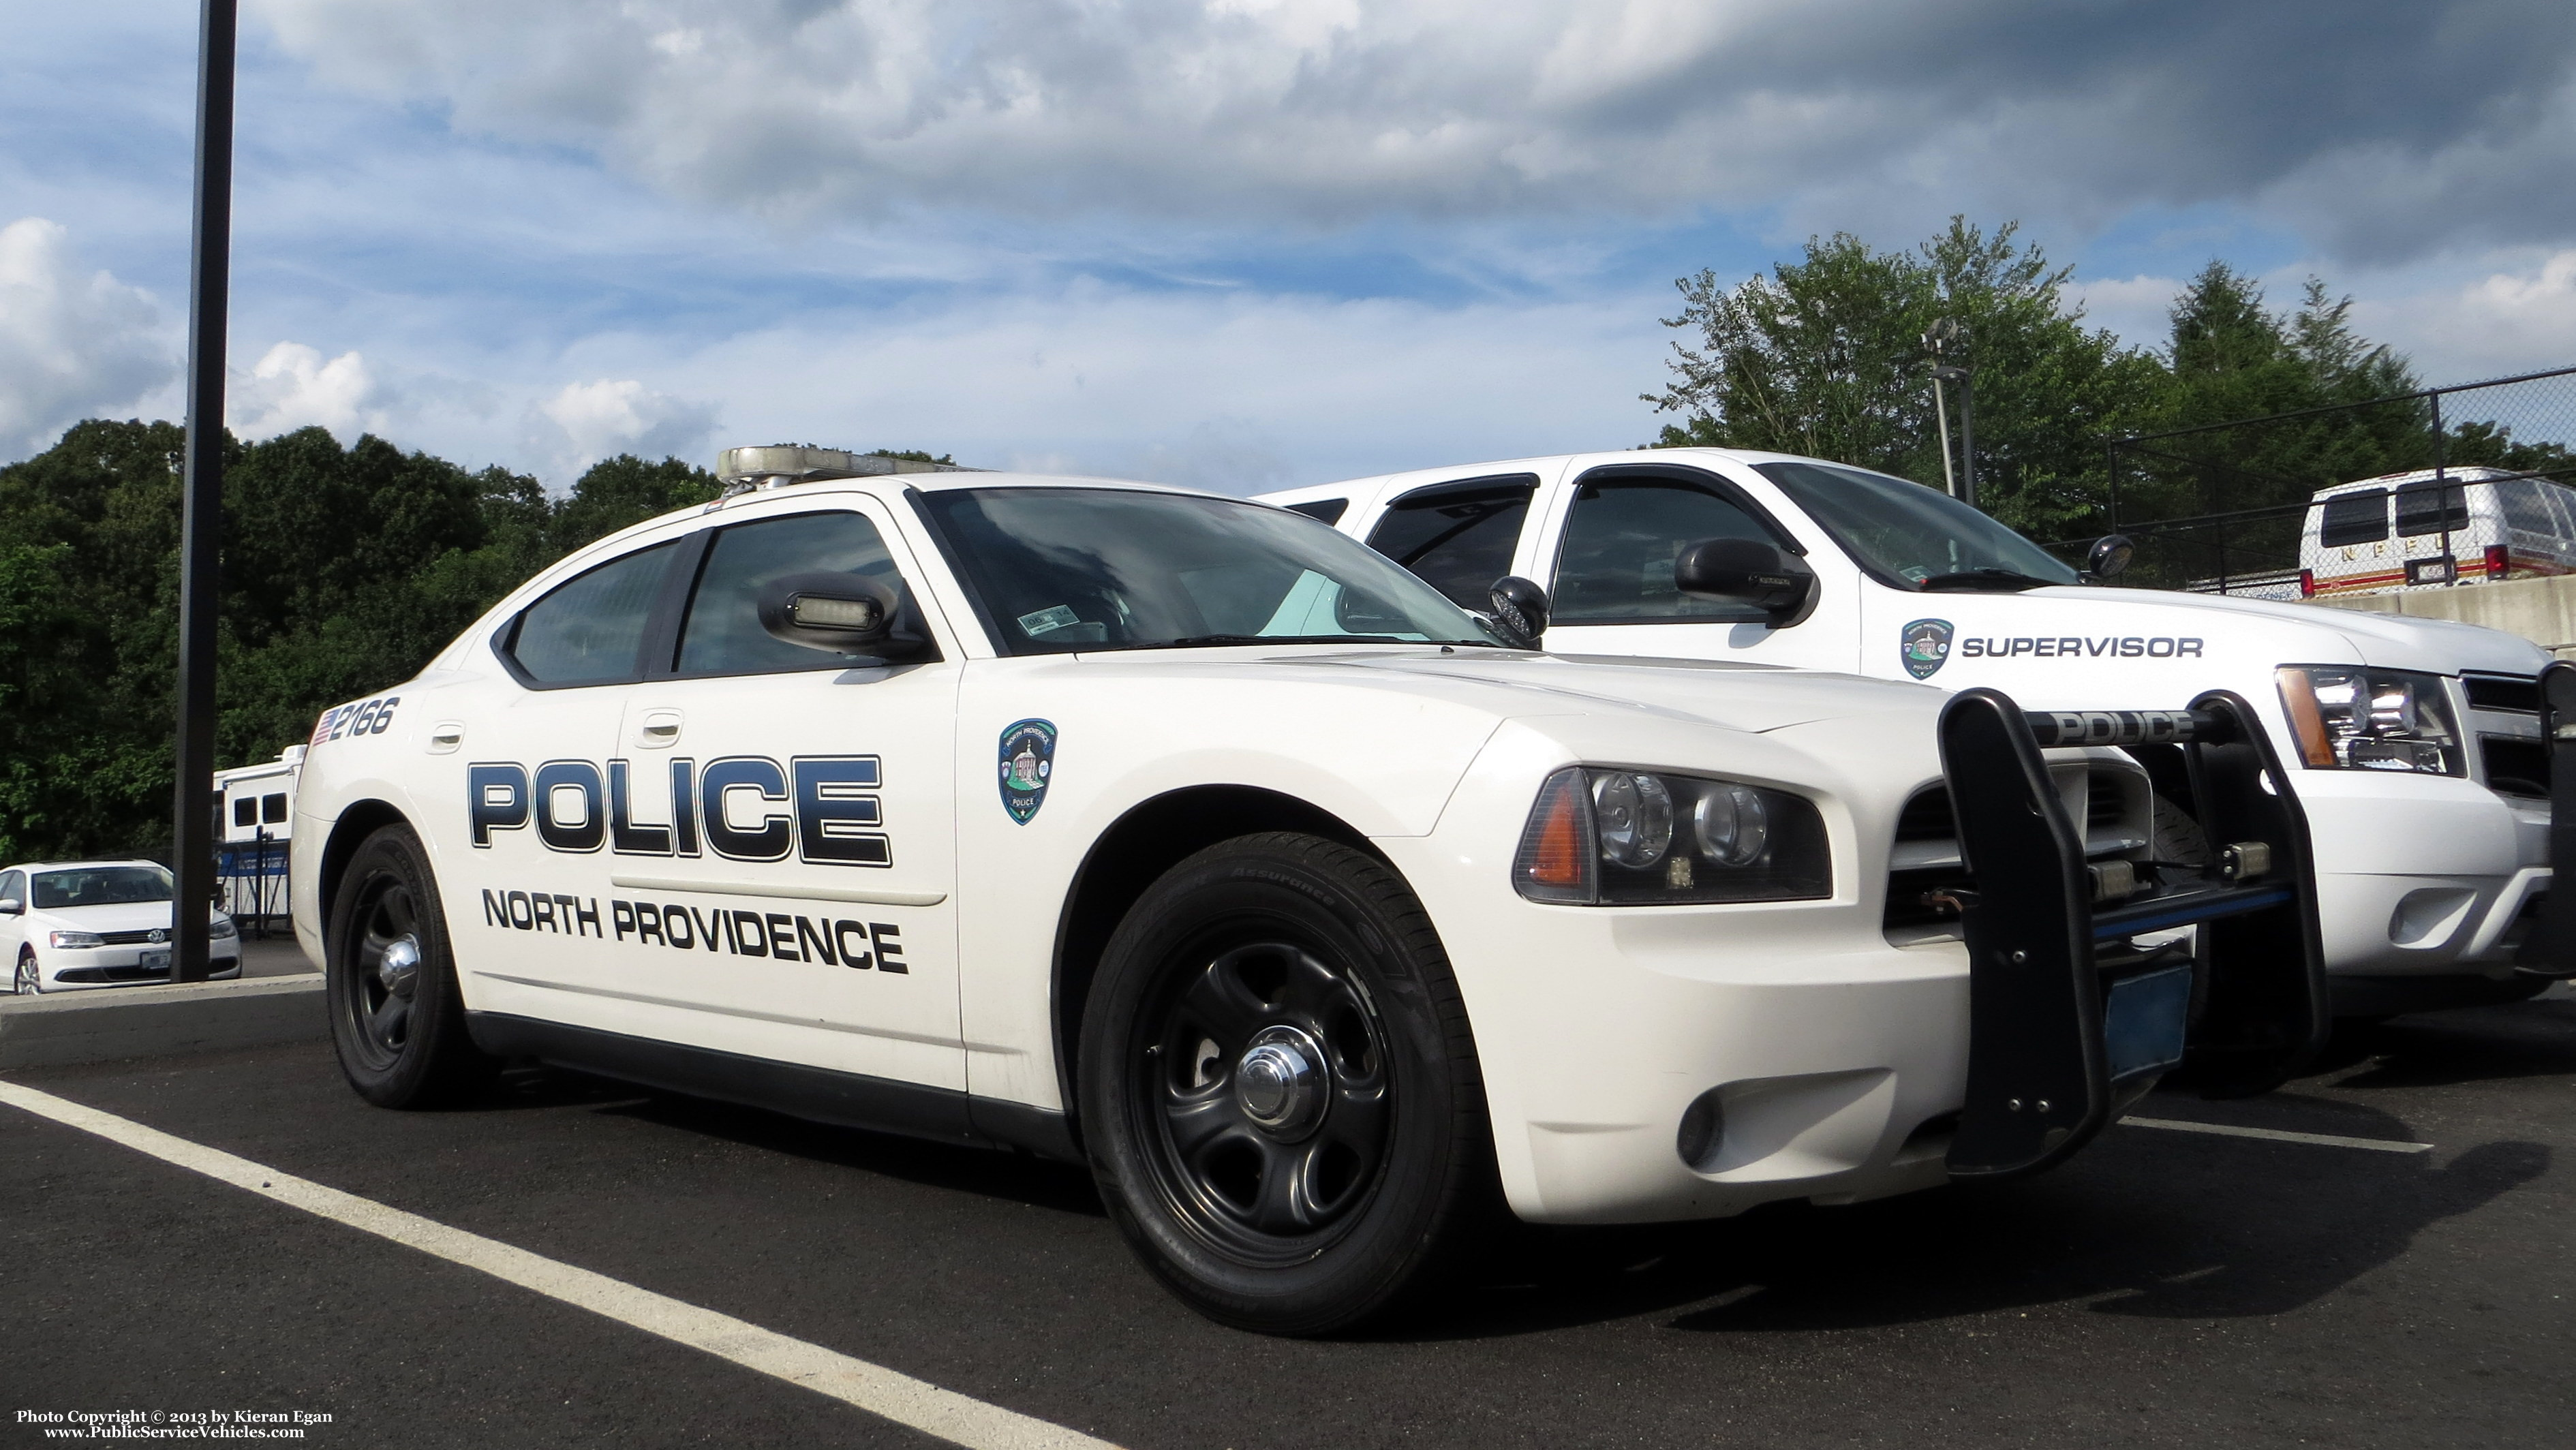 A photo  of North Providence Police
            Cruiser 2166, a 2006-2010 Dodge Charger             taken by Kieran Egan